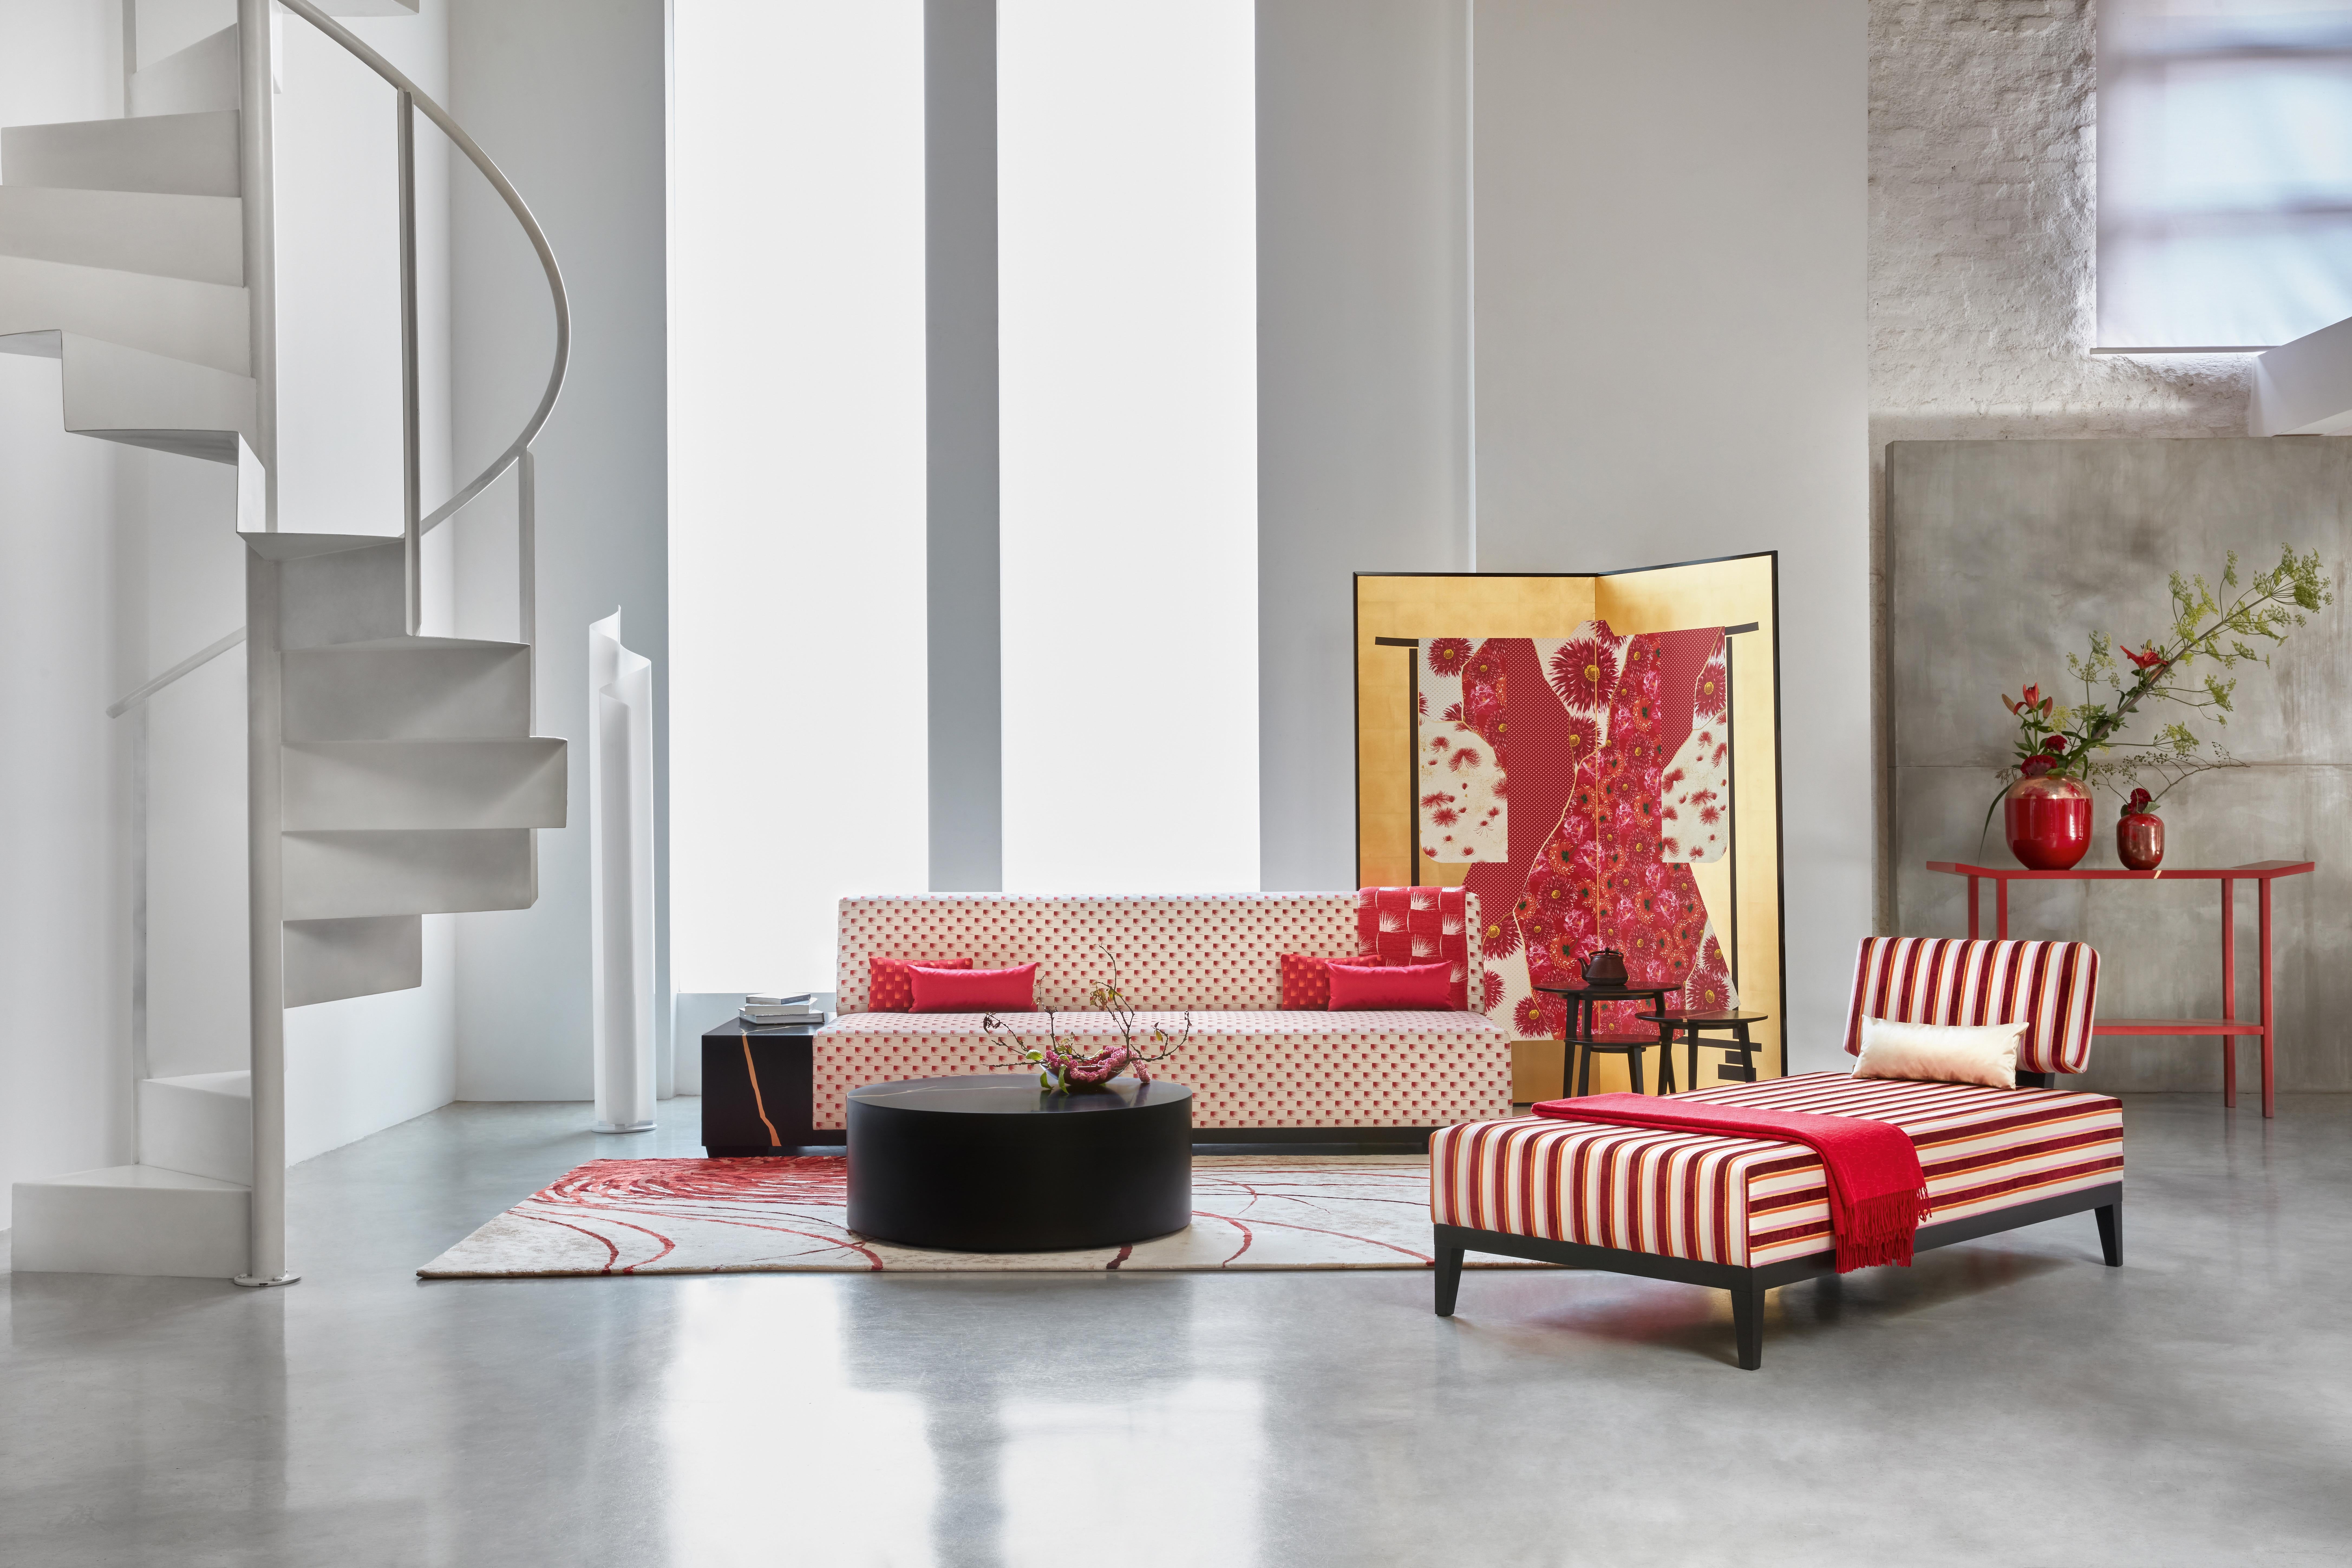 This exquisite rug, crafted by K3 under the visionary direction of founders Kenzo Takada and Jonathan Bouchet Manheim, showcases a stunning, oversized red chrysanthemum design. Merging elegant simplicity with bold graphic elements, this magnificent